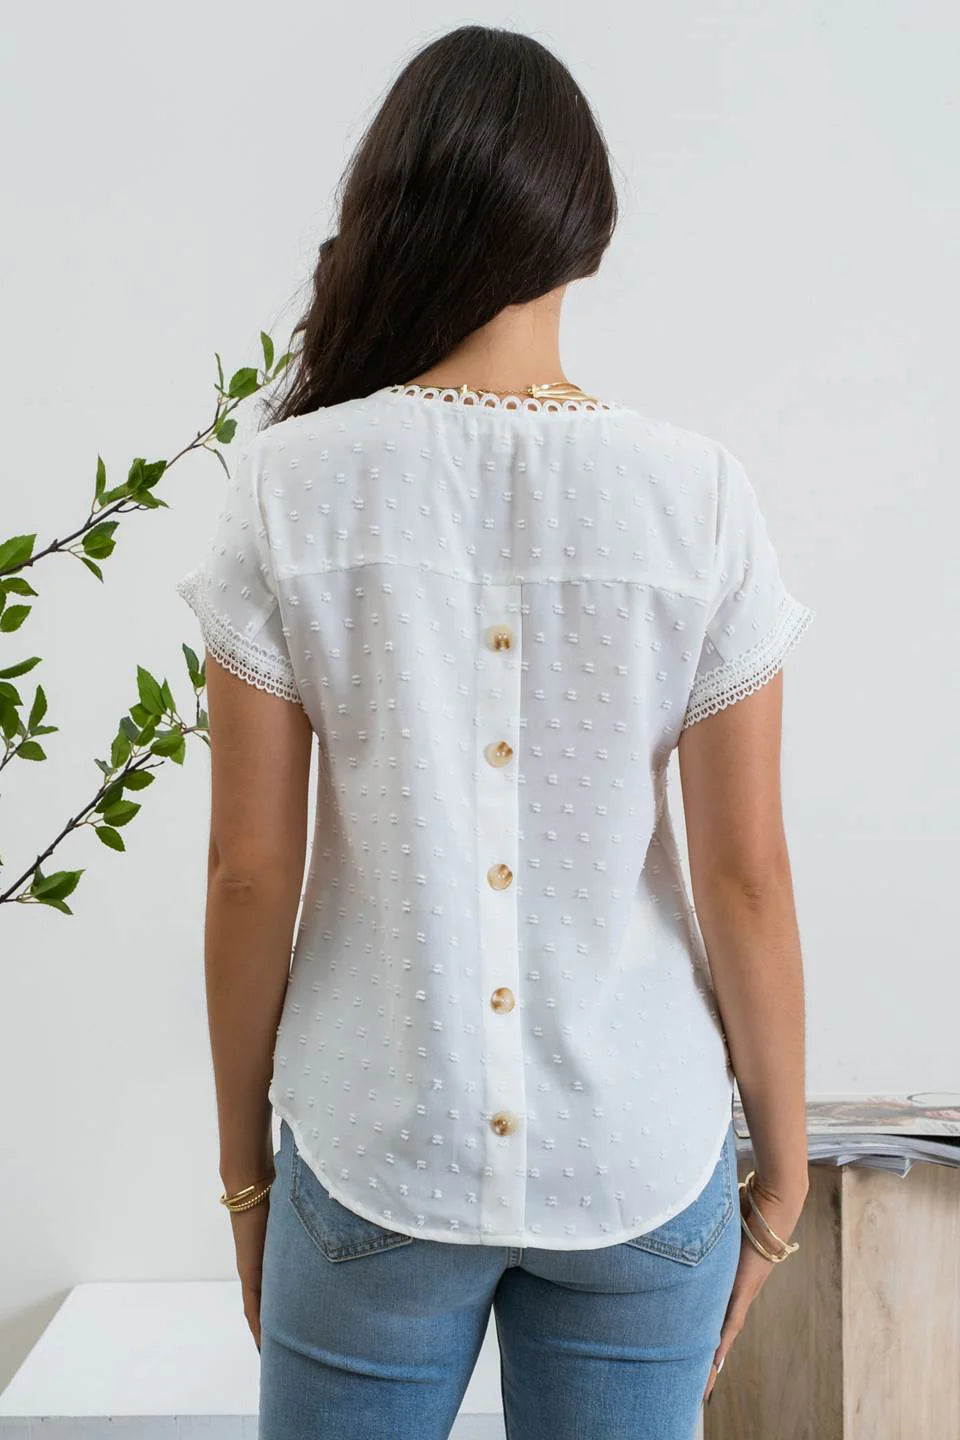 Textured Scallop Lace Trim Top